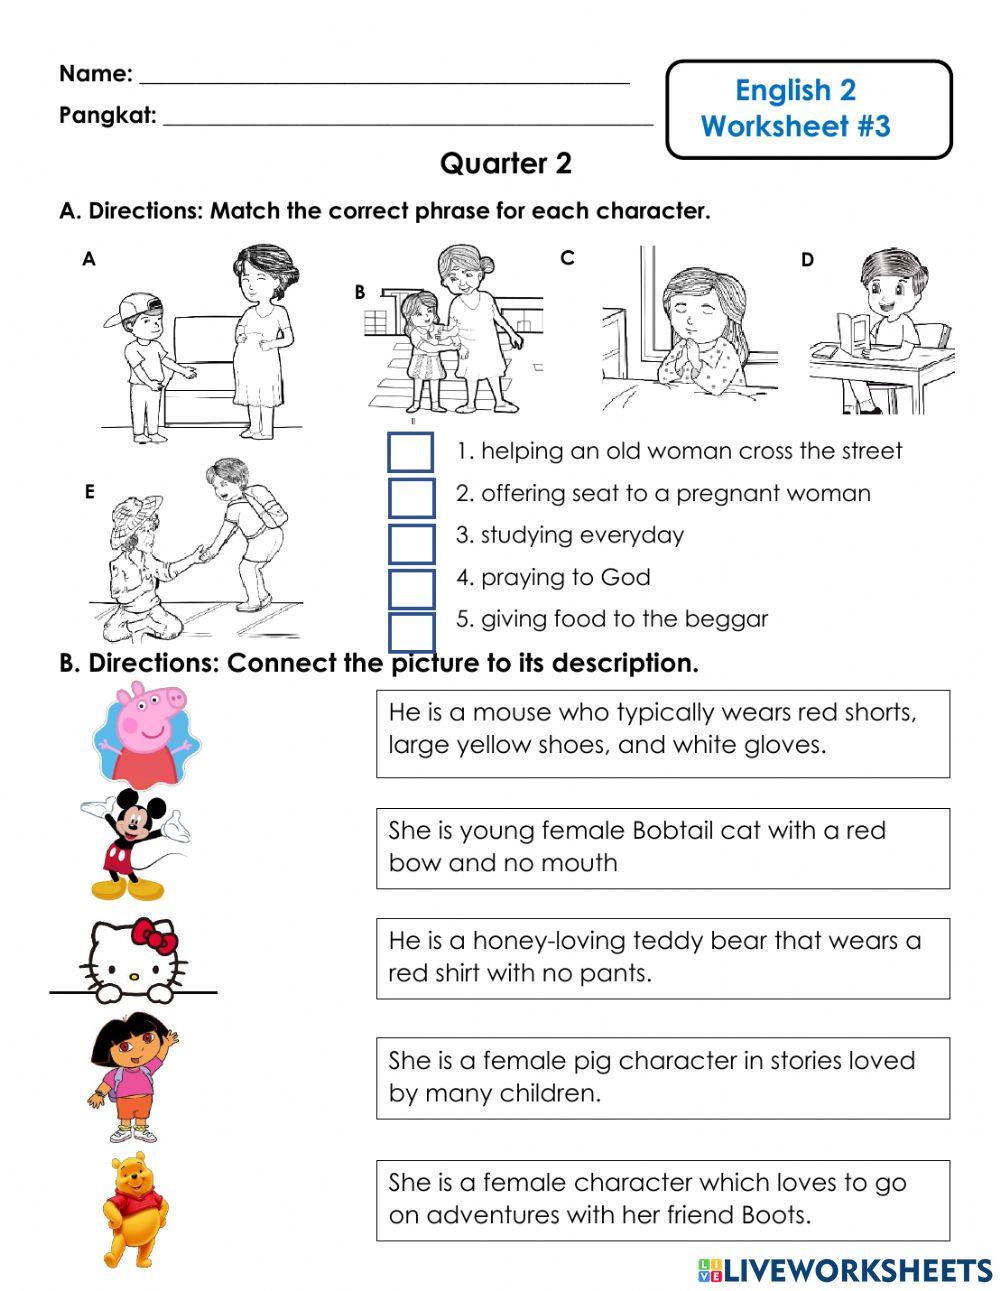 English - Use words and sentence to describe the character-illustration